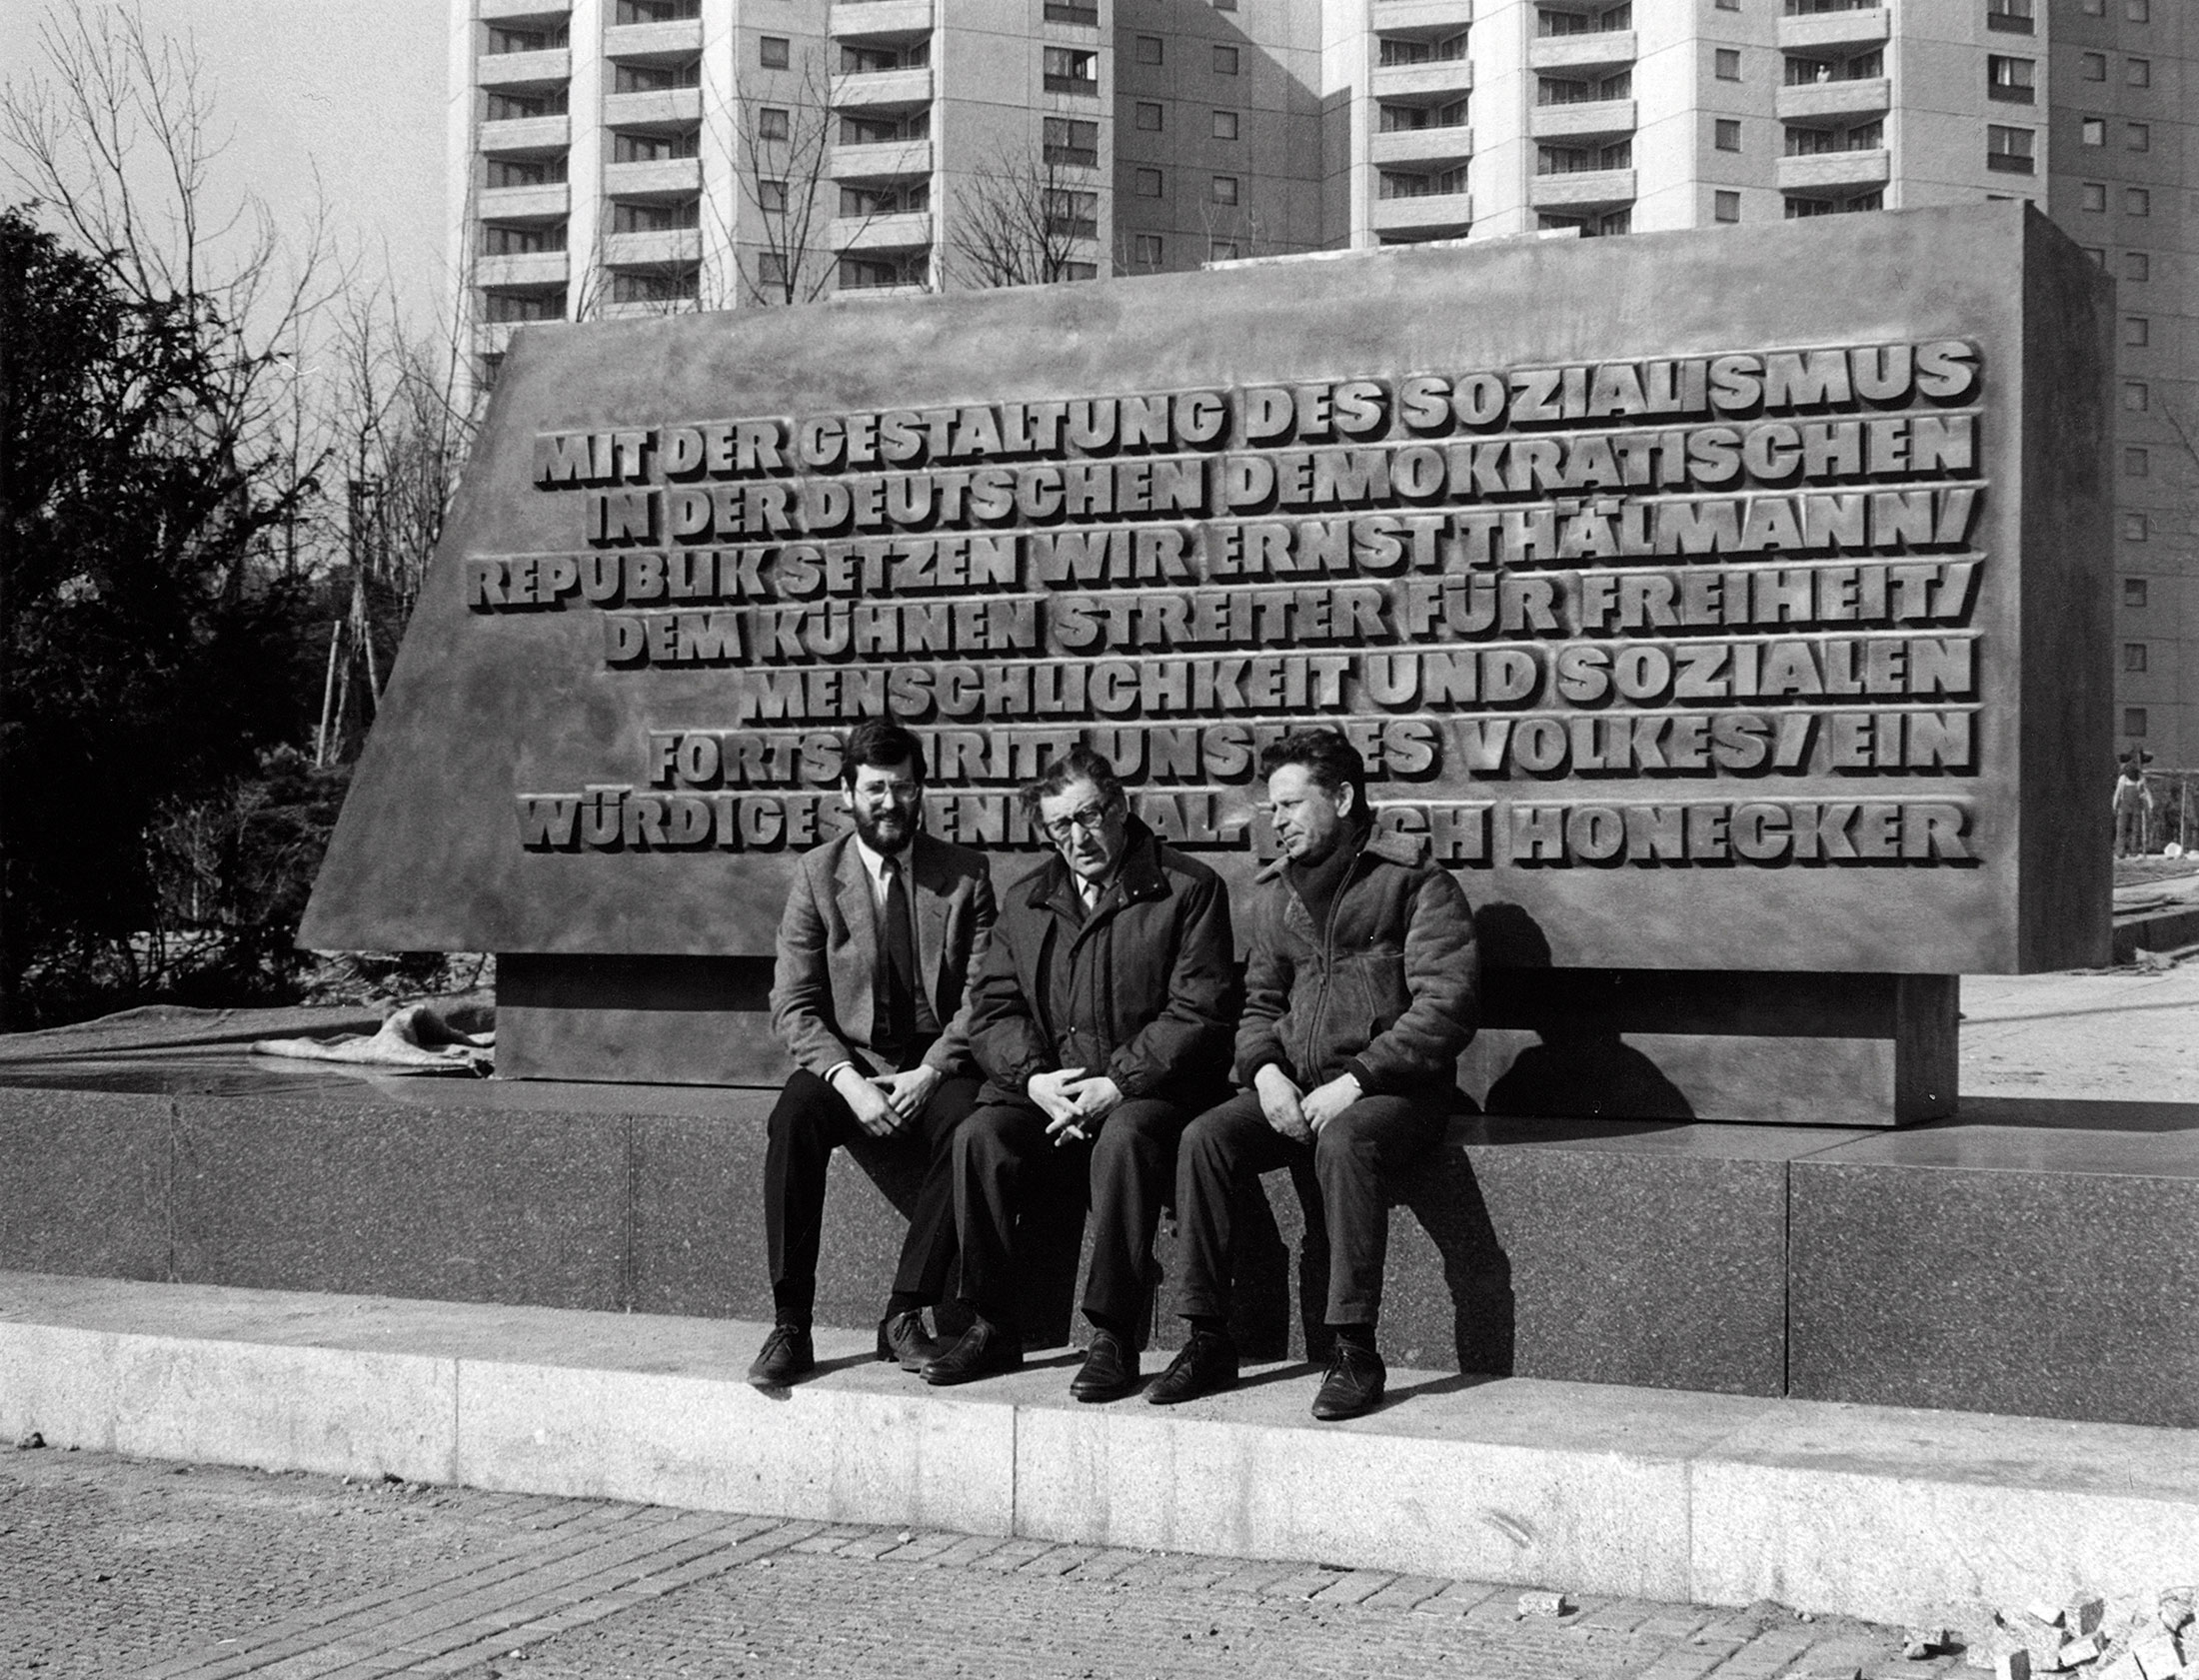 The sculptor Lew Kerbel (centre) in front of the bronze stele with the inscription by Erich Honecker.